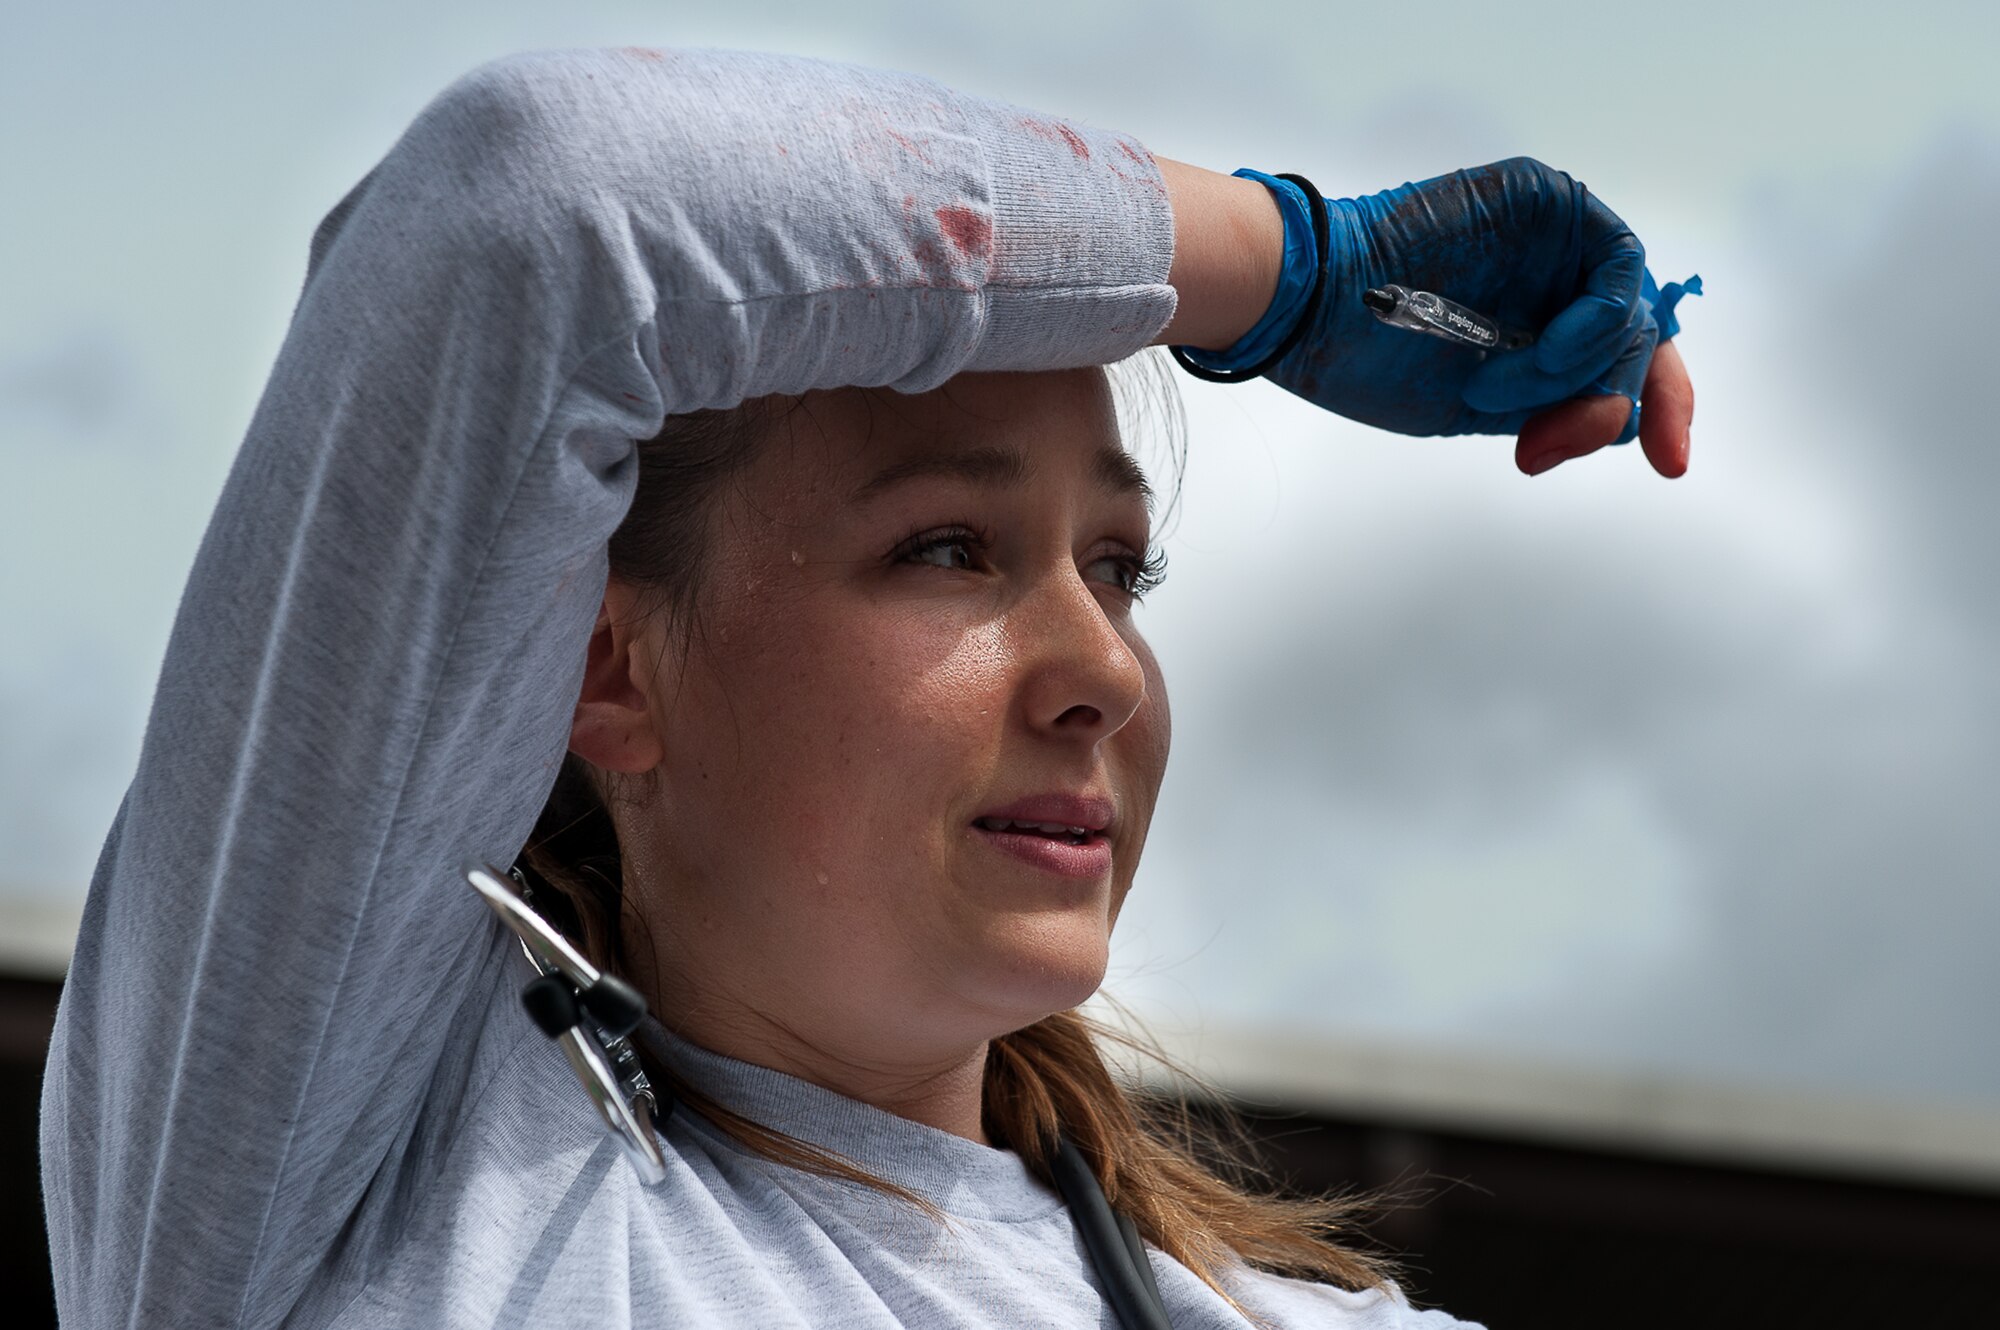 U.S. Air Force Staff Sgt. Jozlinn Rae, 86th Aeromedical Evacuation Squadron technician, wipes sweat off her forehead during a training simulation at the 86th Medical Group Simulation Center on Ramstein Air Base, Germany, June 29, 2017. The training required Rae to quickly assess her patient’s injury under pressure while constantly moving around the scene. (U.S. Air Force photo by Senior Airman Devin Boyer)